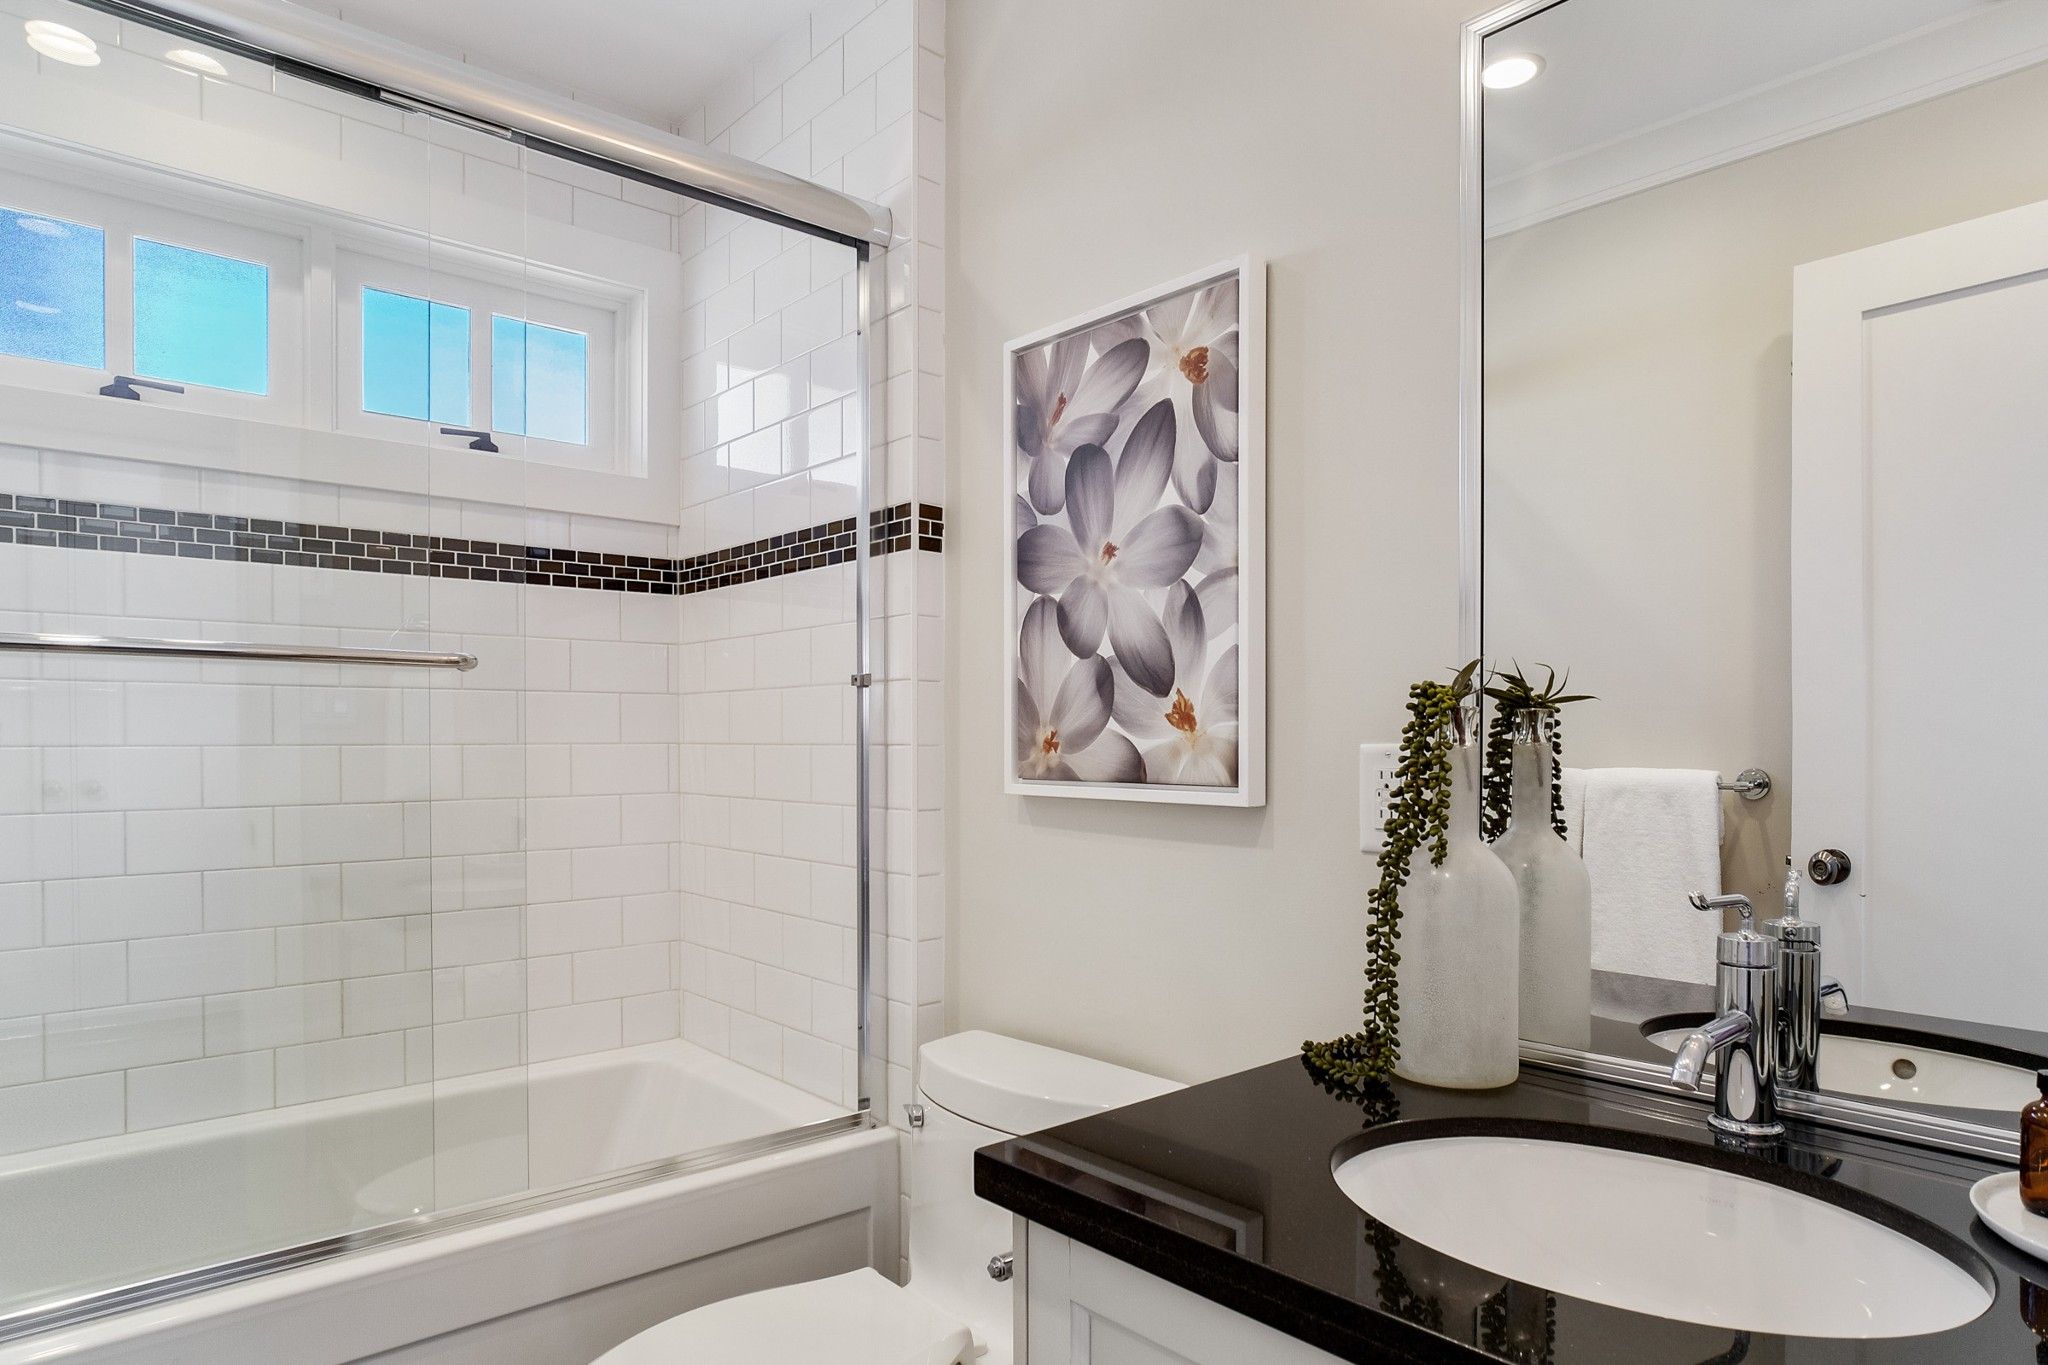 Photo 19: Photos: 1959 W 15TH Avenue in Vancouver: Kitsilano Townhouse for sale (Vancouver West)  : MLS®# R2489120